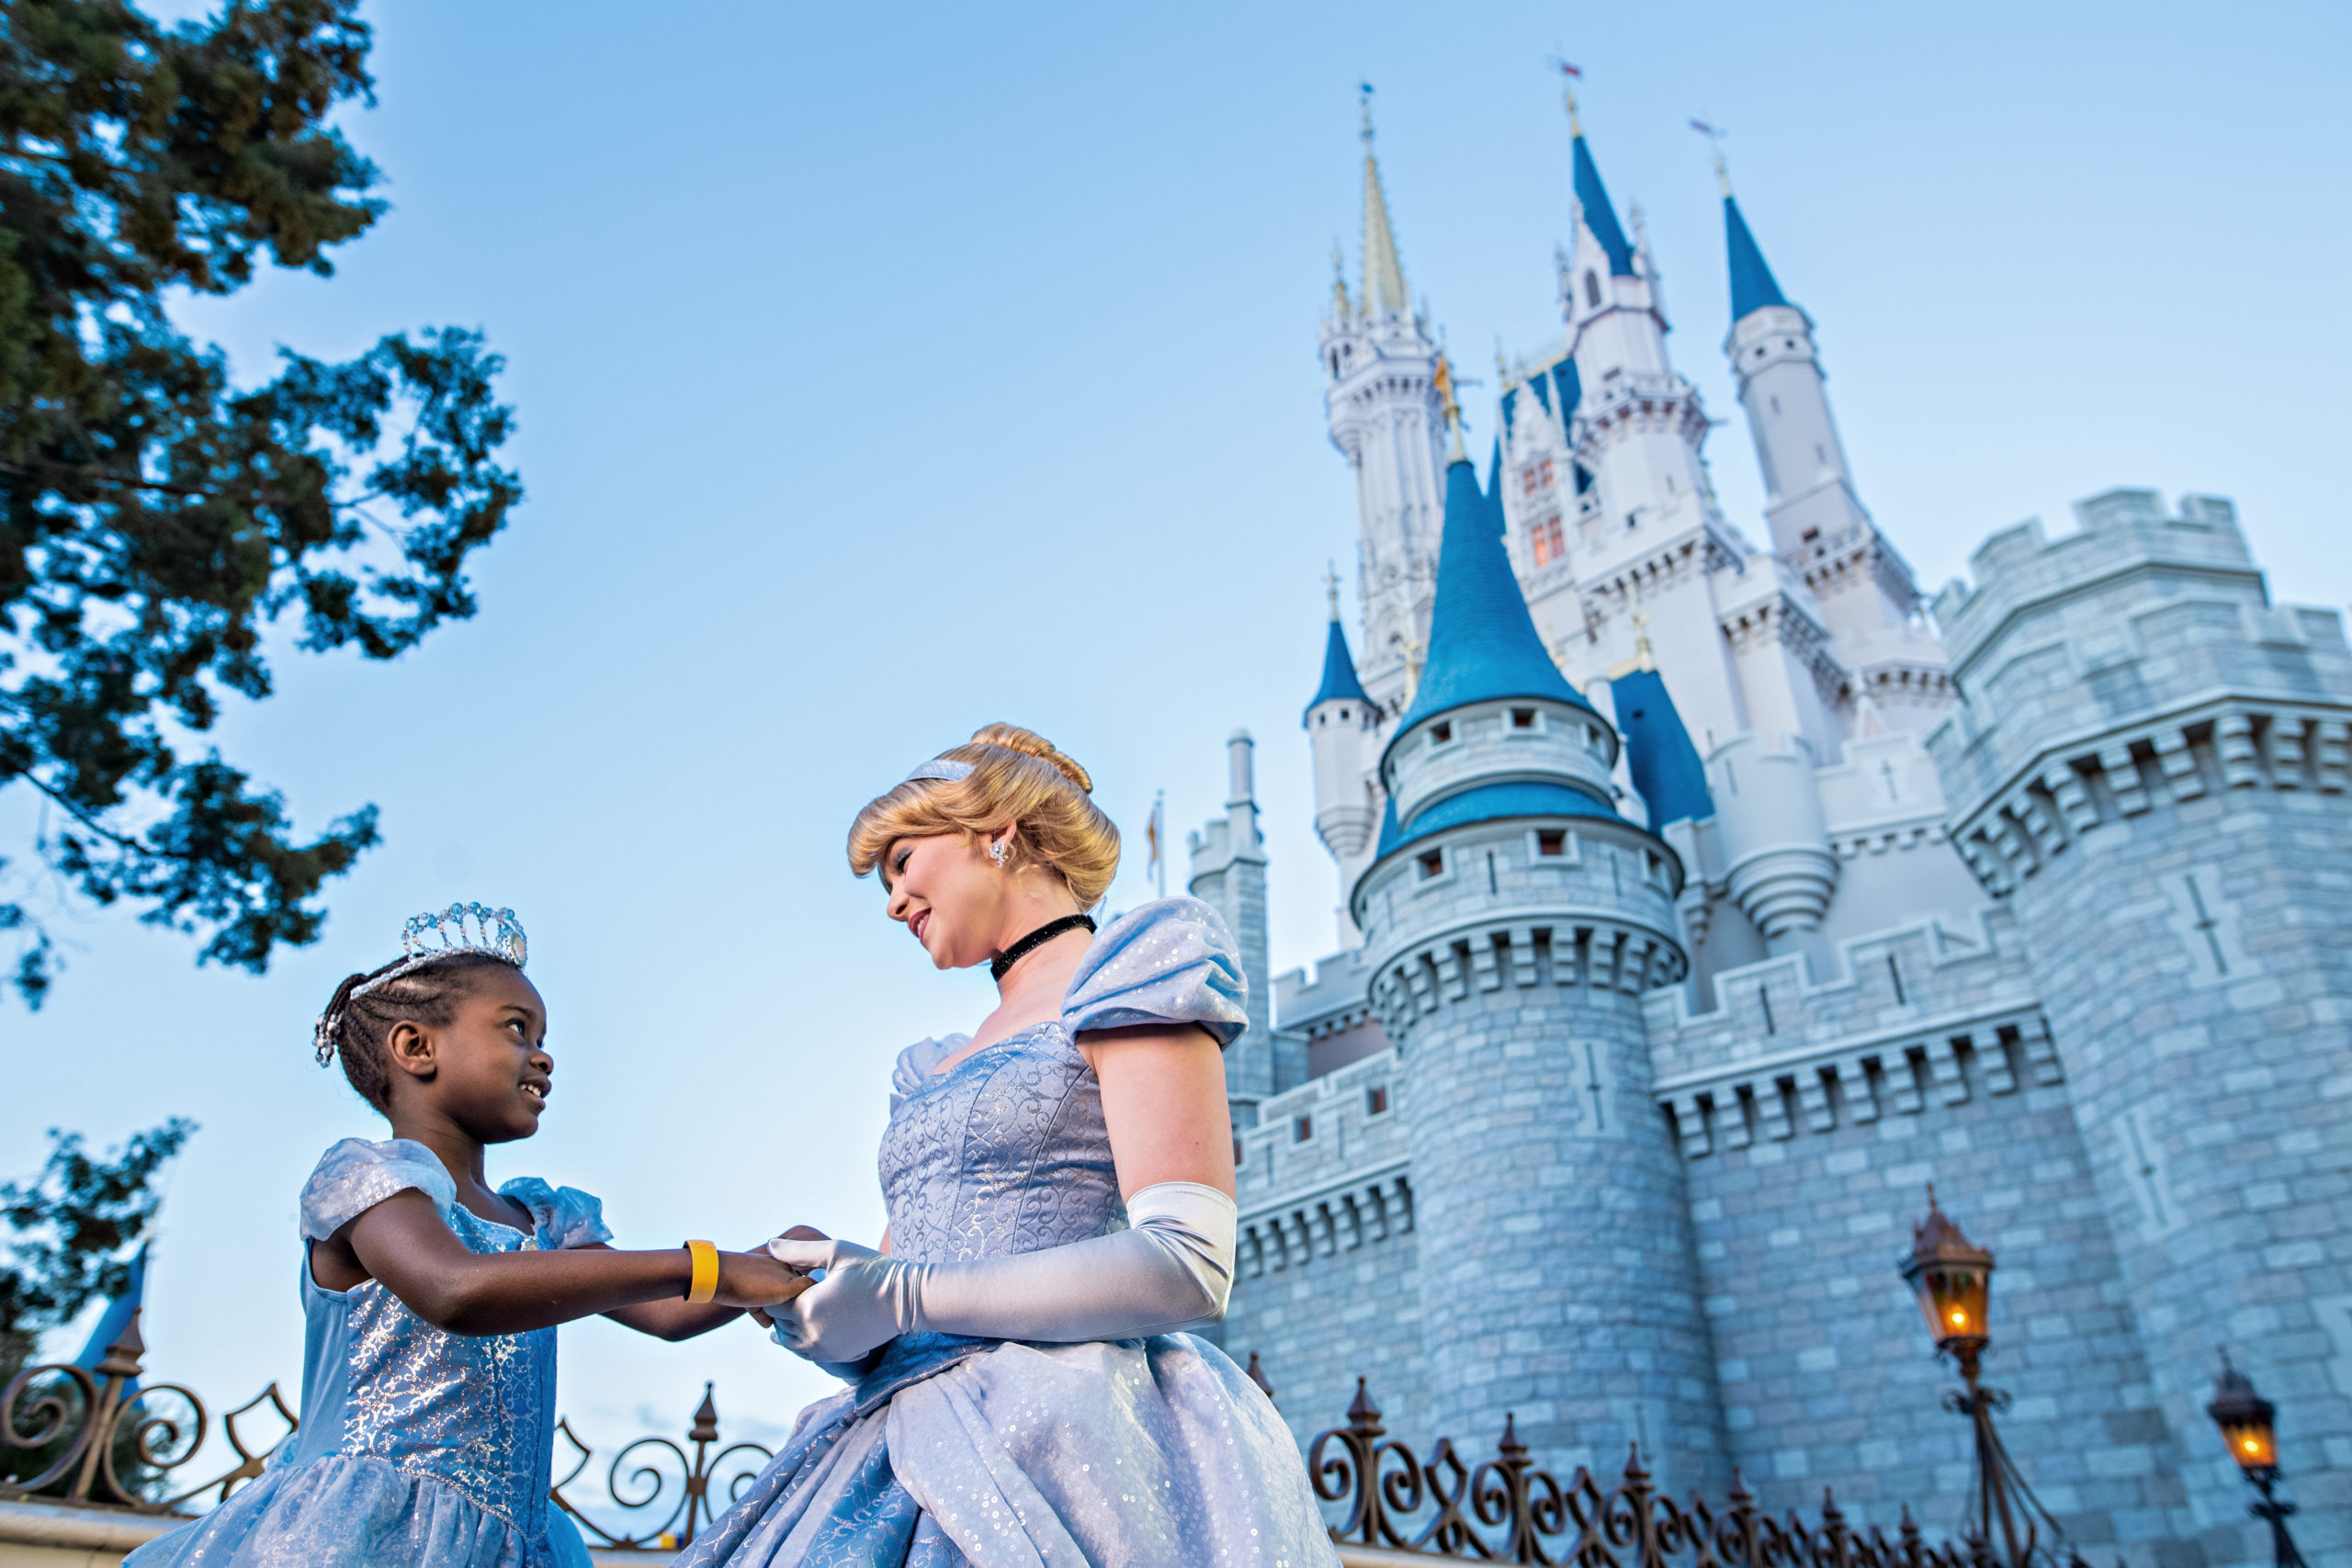 Disney Castle - Woman holding hands with little girl2